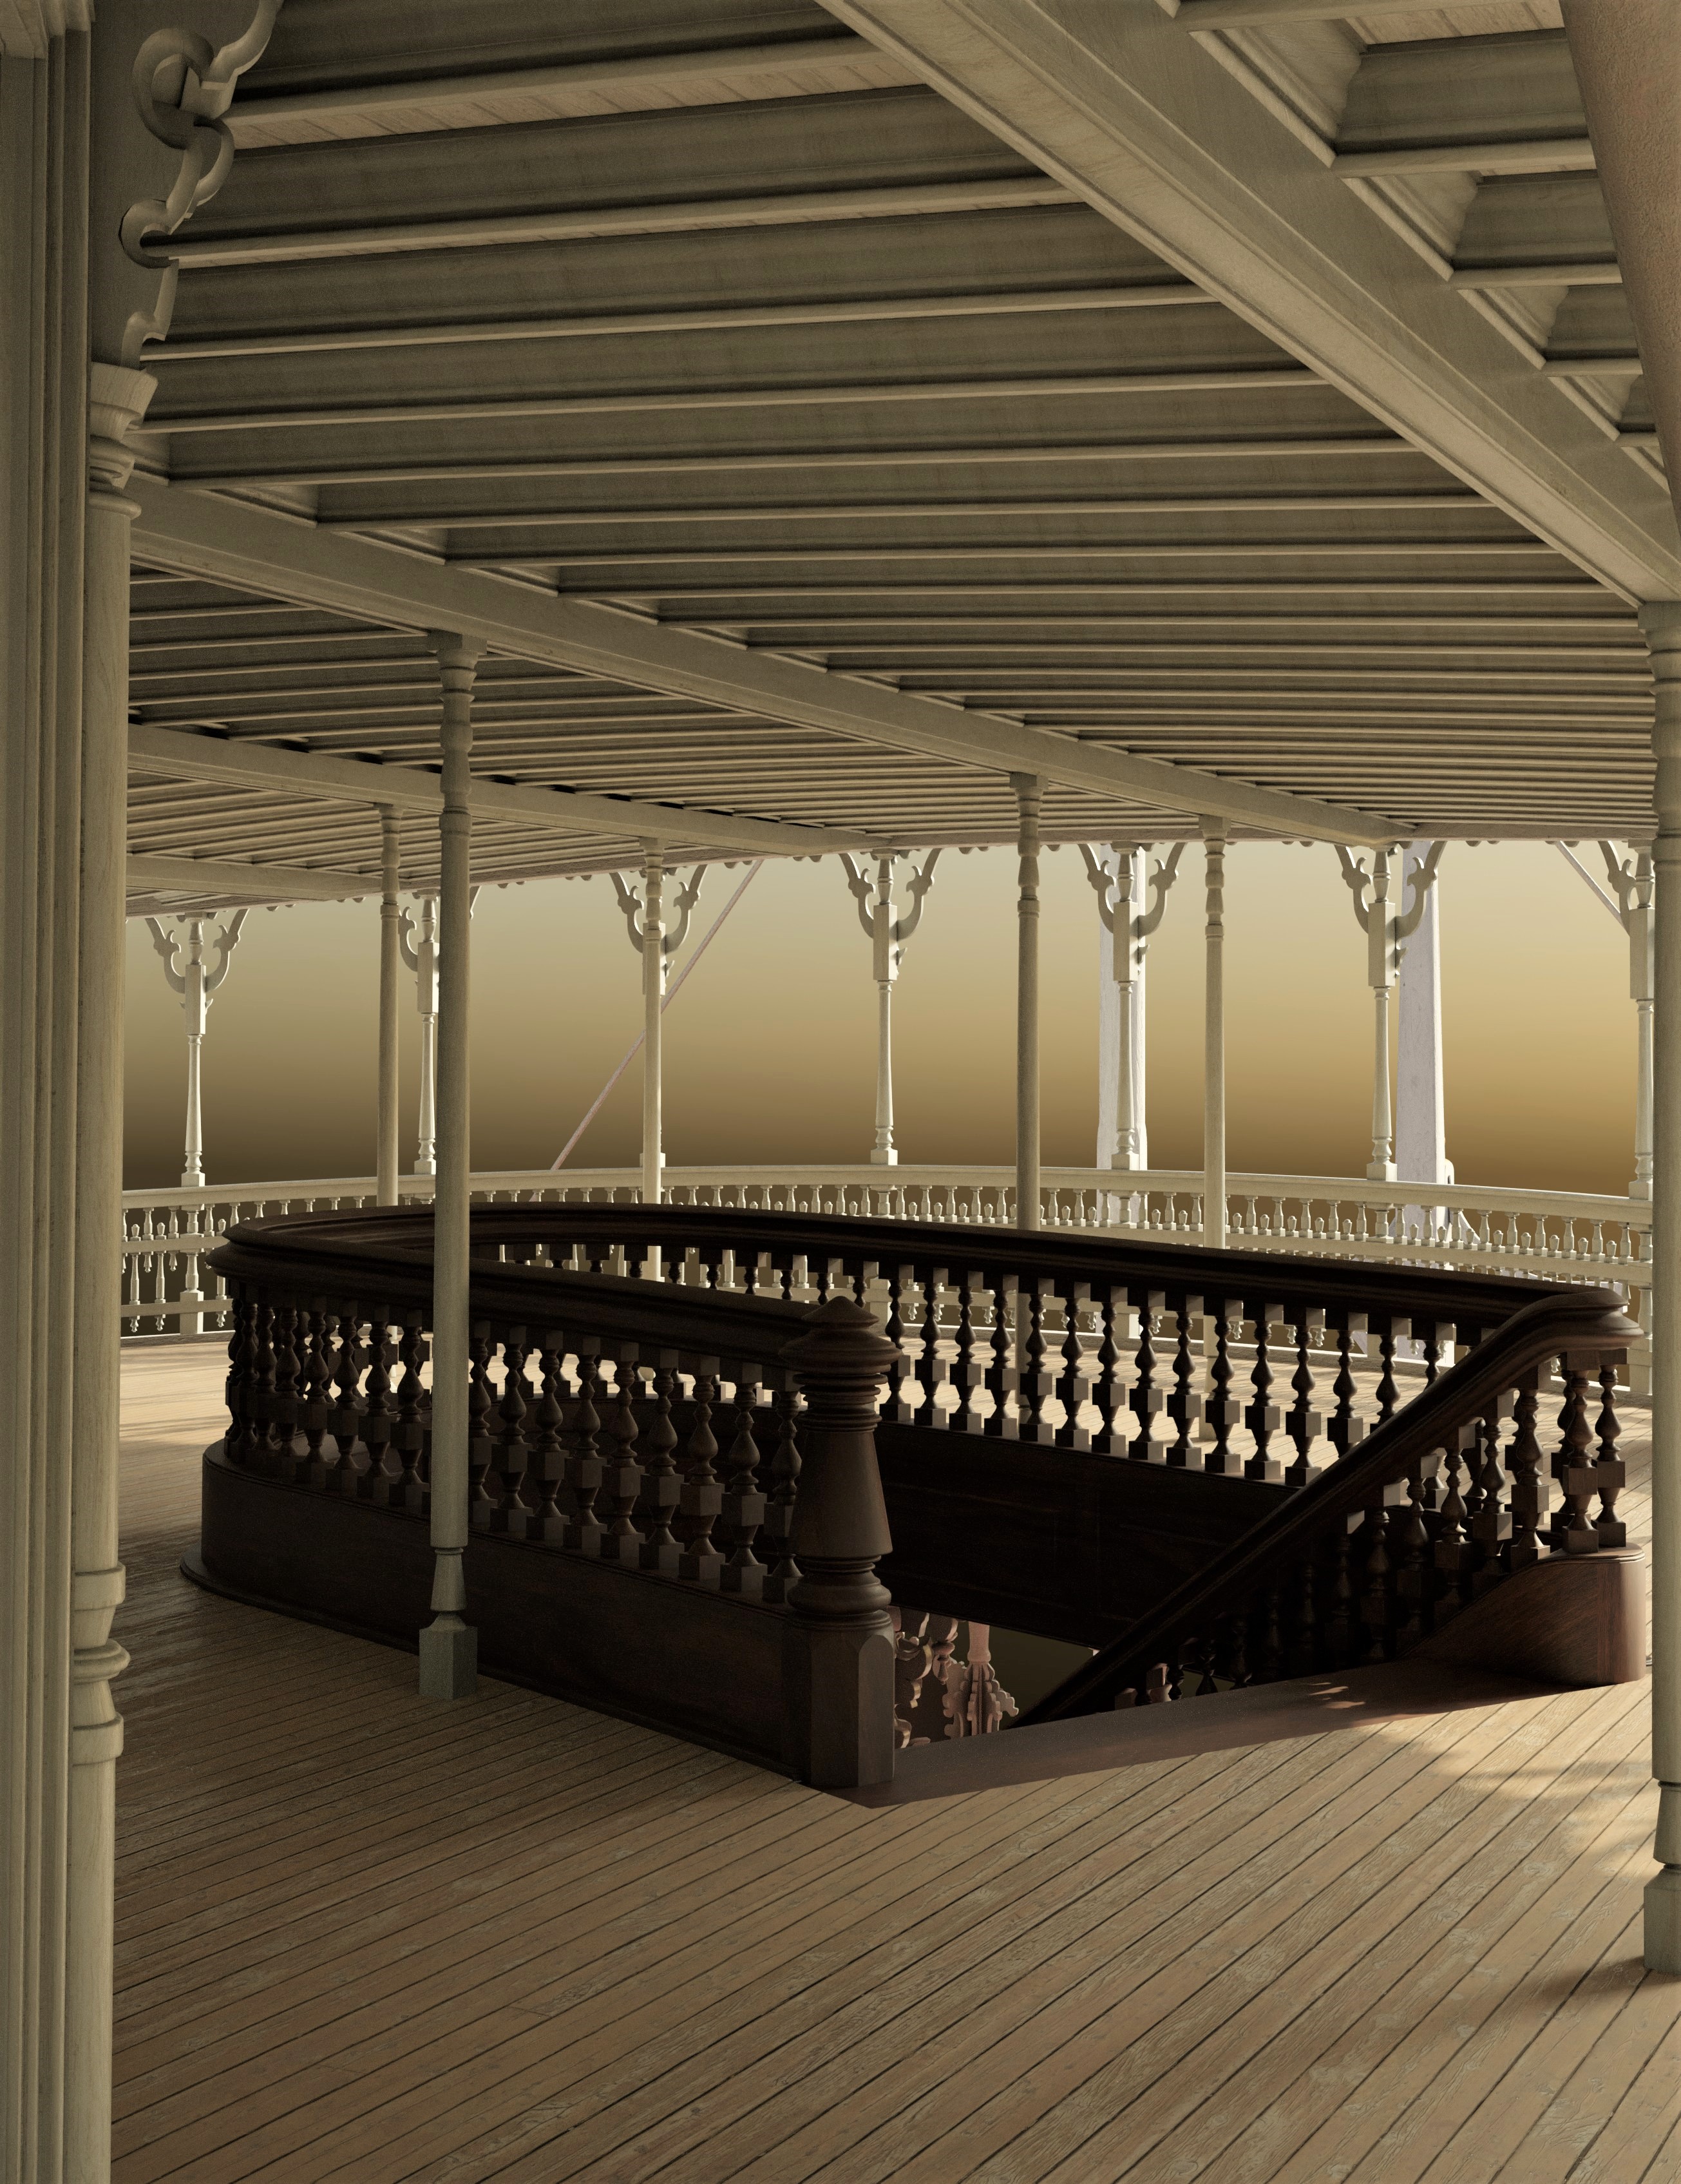 J.M. White: Digital reconstruction of the staircase landing - Rendering by Jens Mittelbach, CC BY 4.0